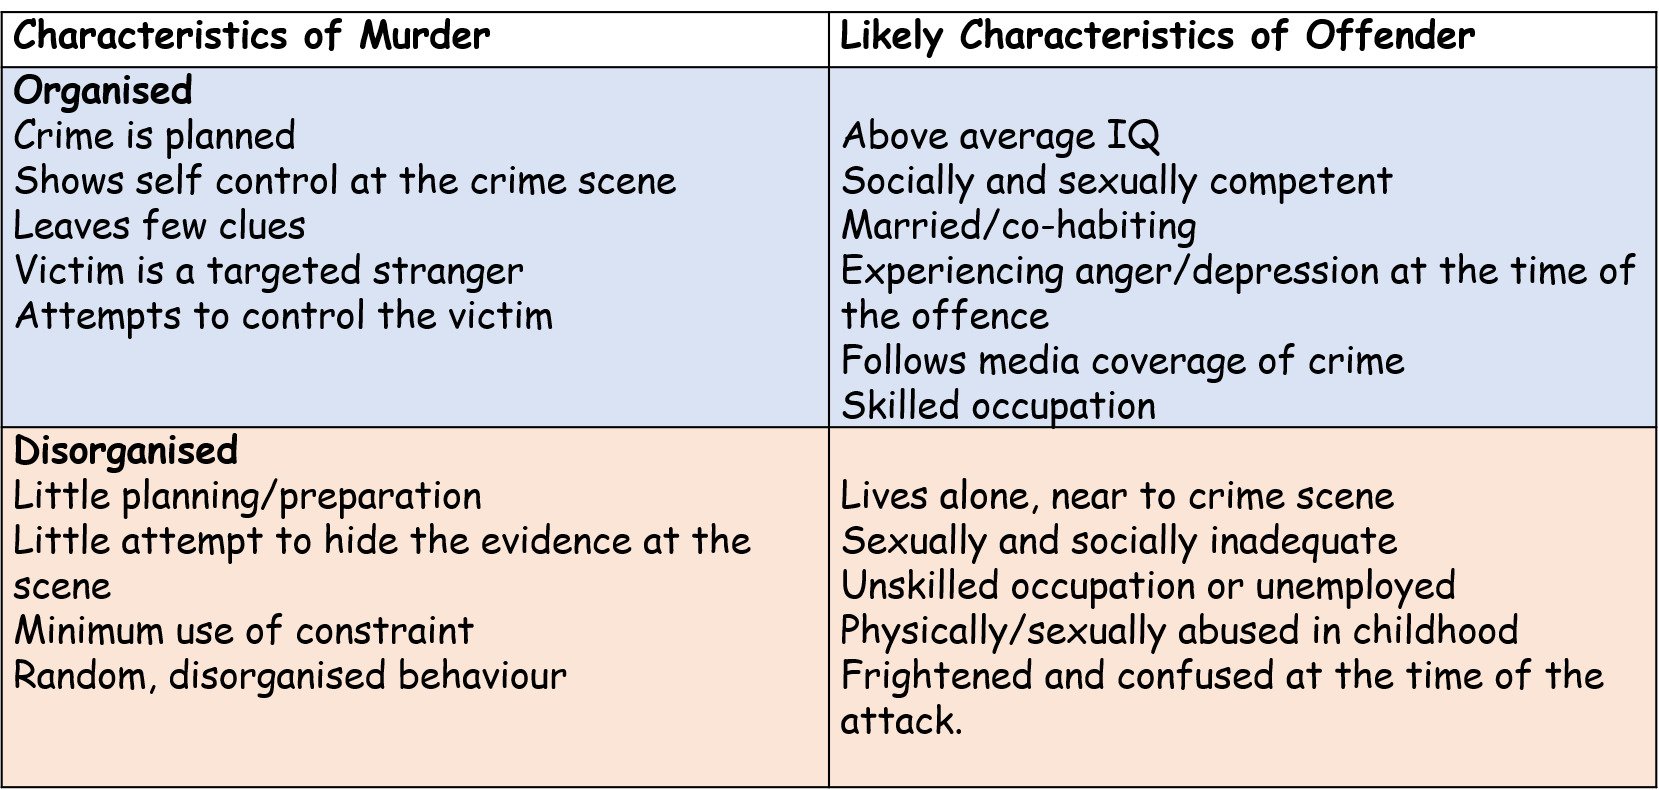 Characteristics of an offender